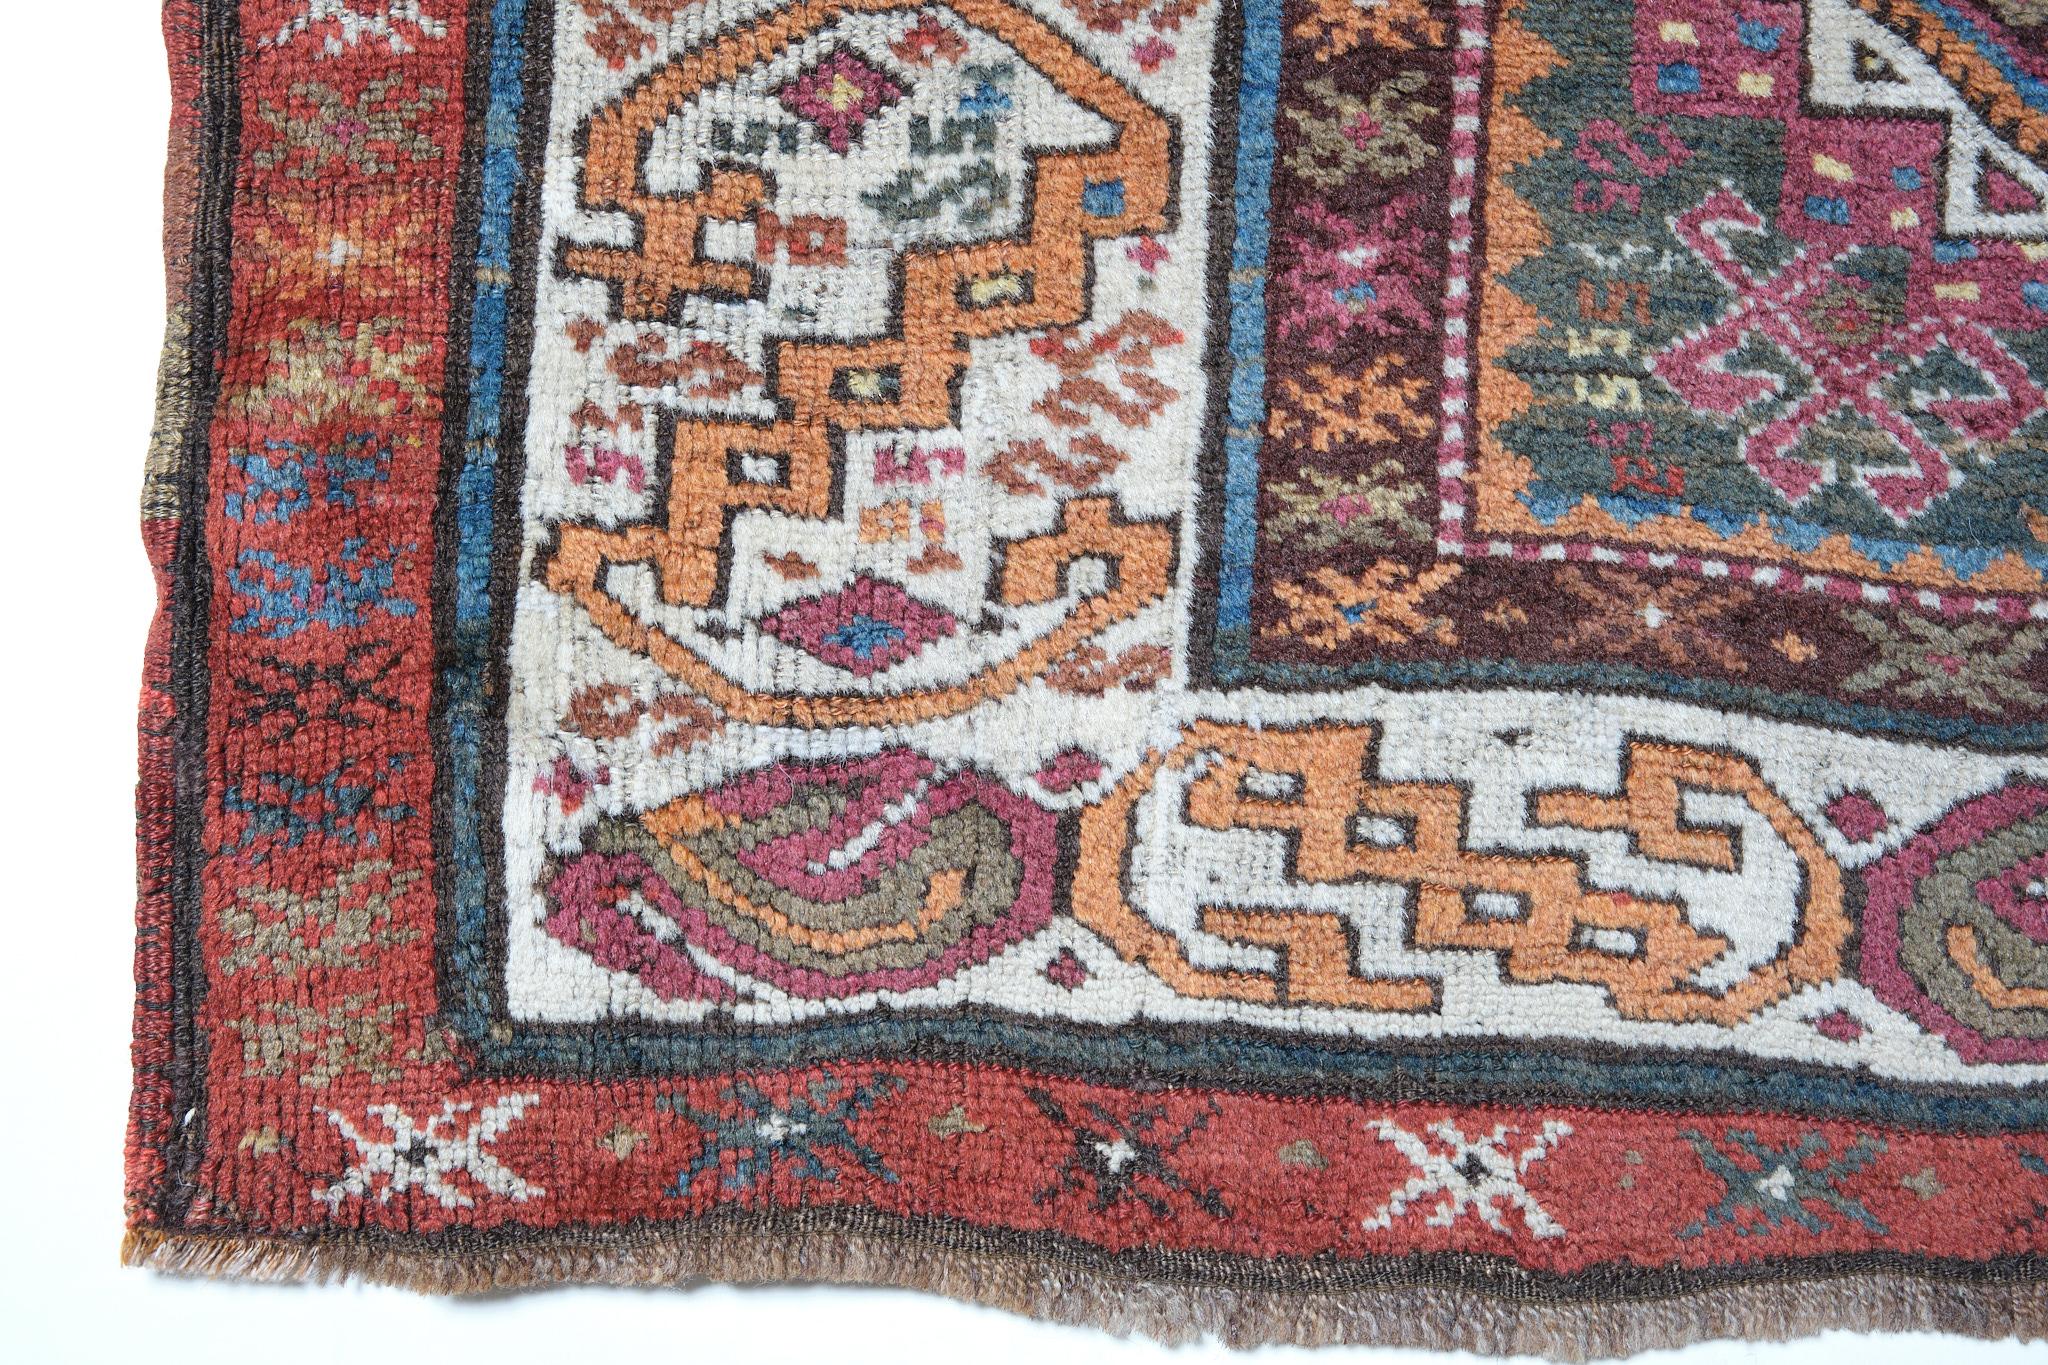 This is an antique runner rug from the Caucasus region with a rare and beautiful color composition.

Of all the rugs of the oriental world, it is the work of the Caucasian weavers that has been most revered since ancient times. The superlative